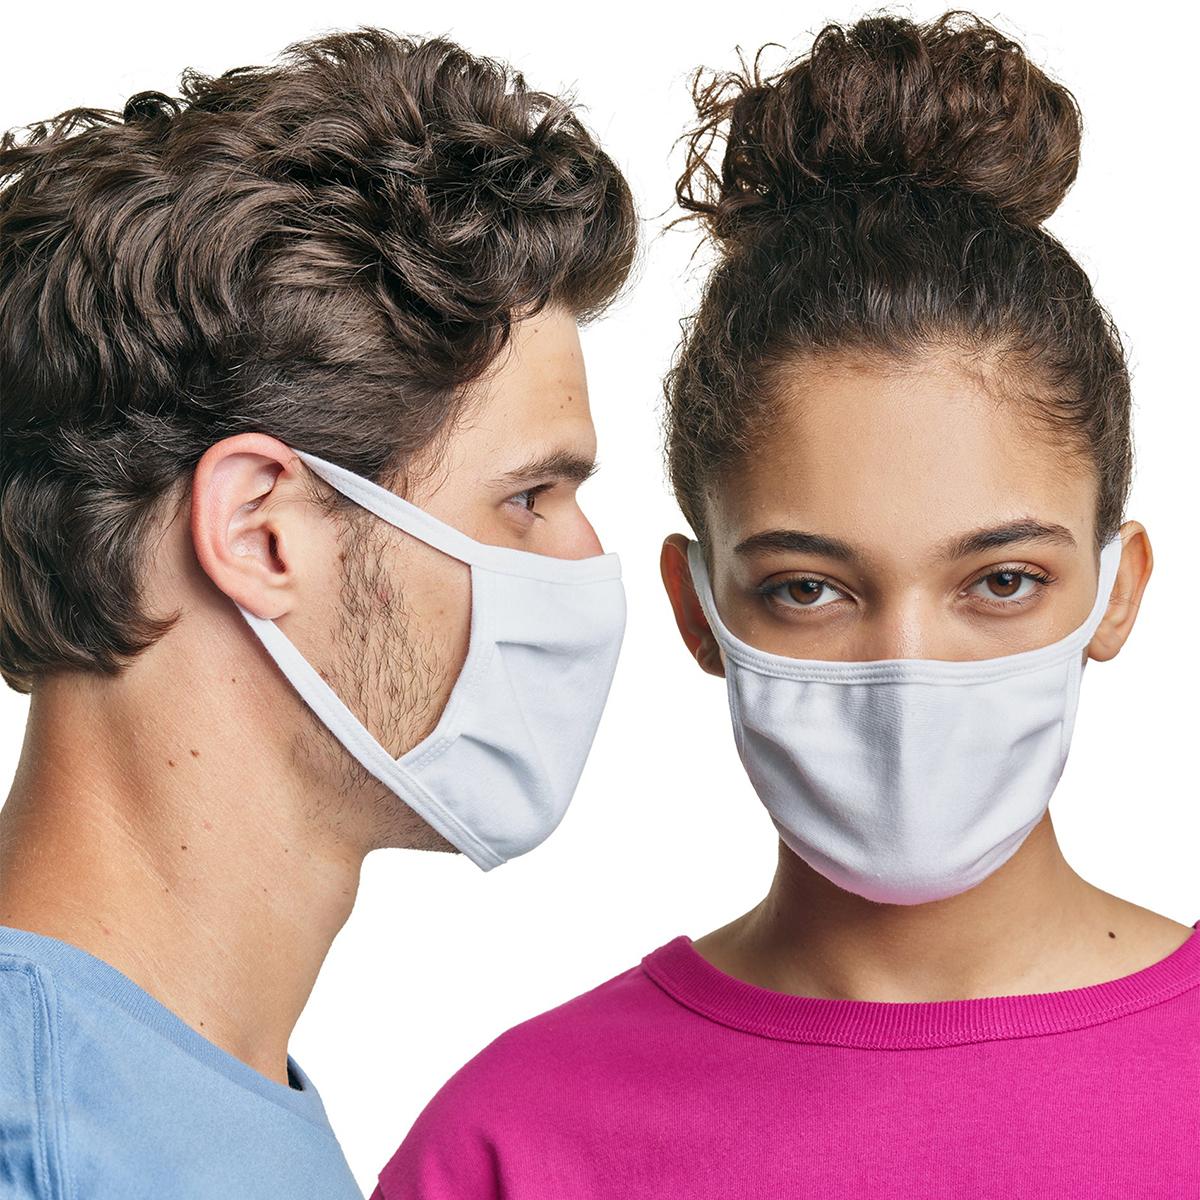 10 Hanes Wicking Cool Comfort Cotton 3-Ply Reusable Masks for $13.13 Shipped